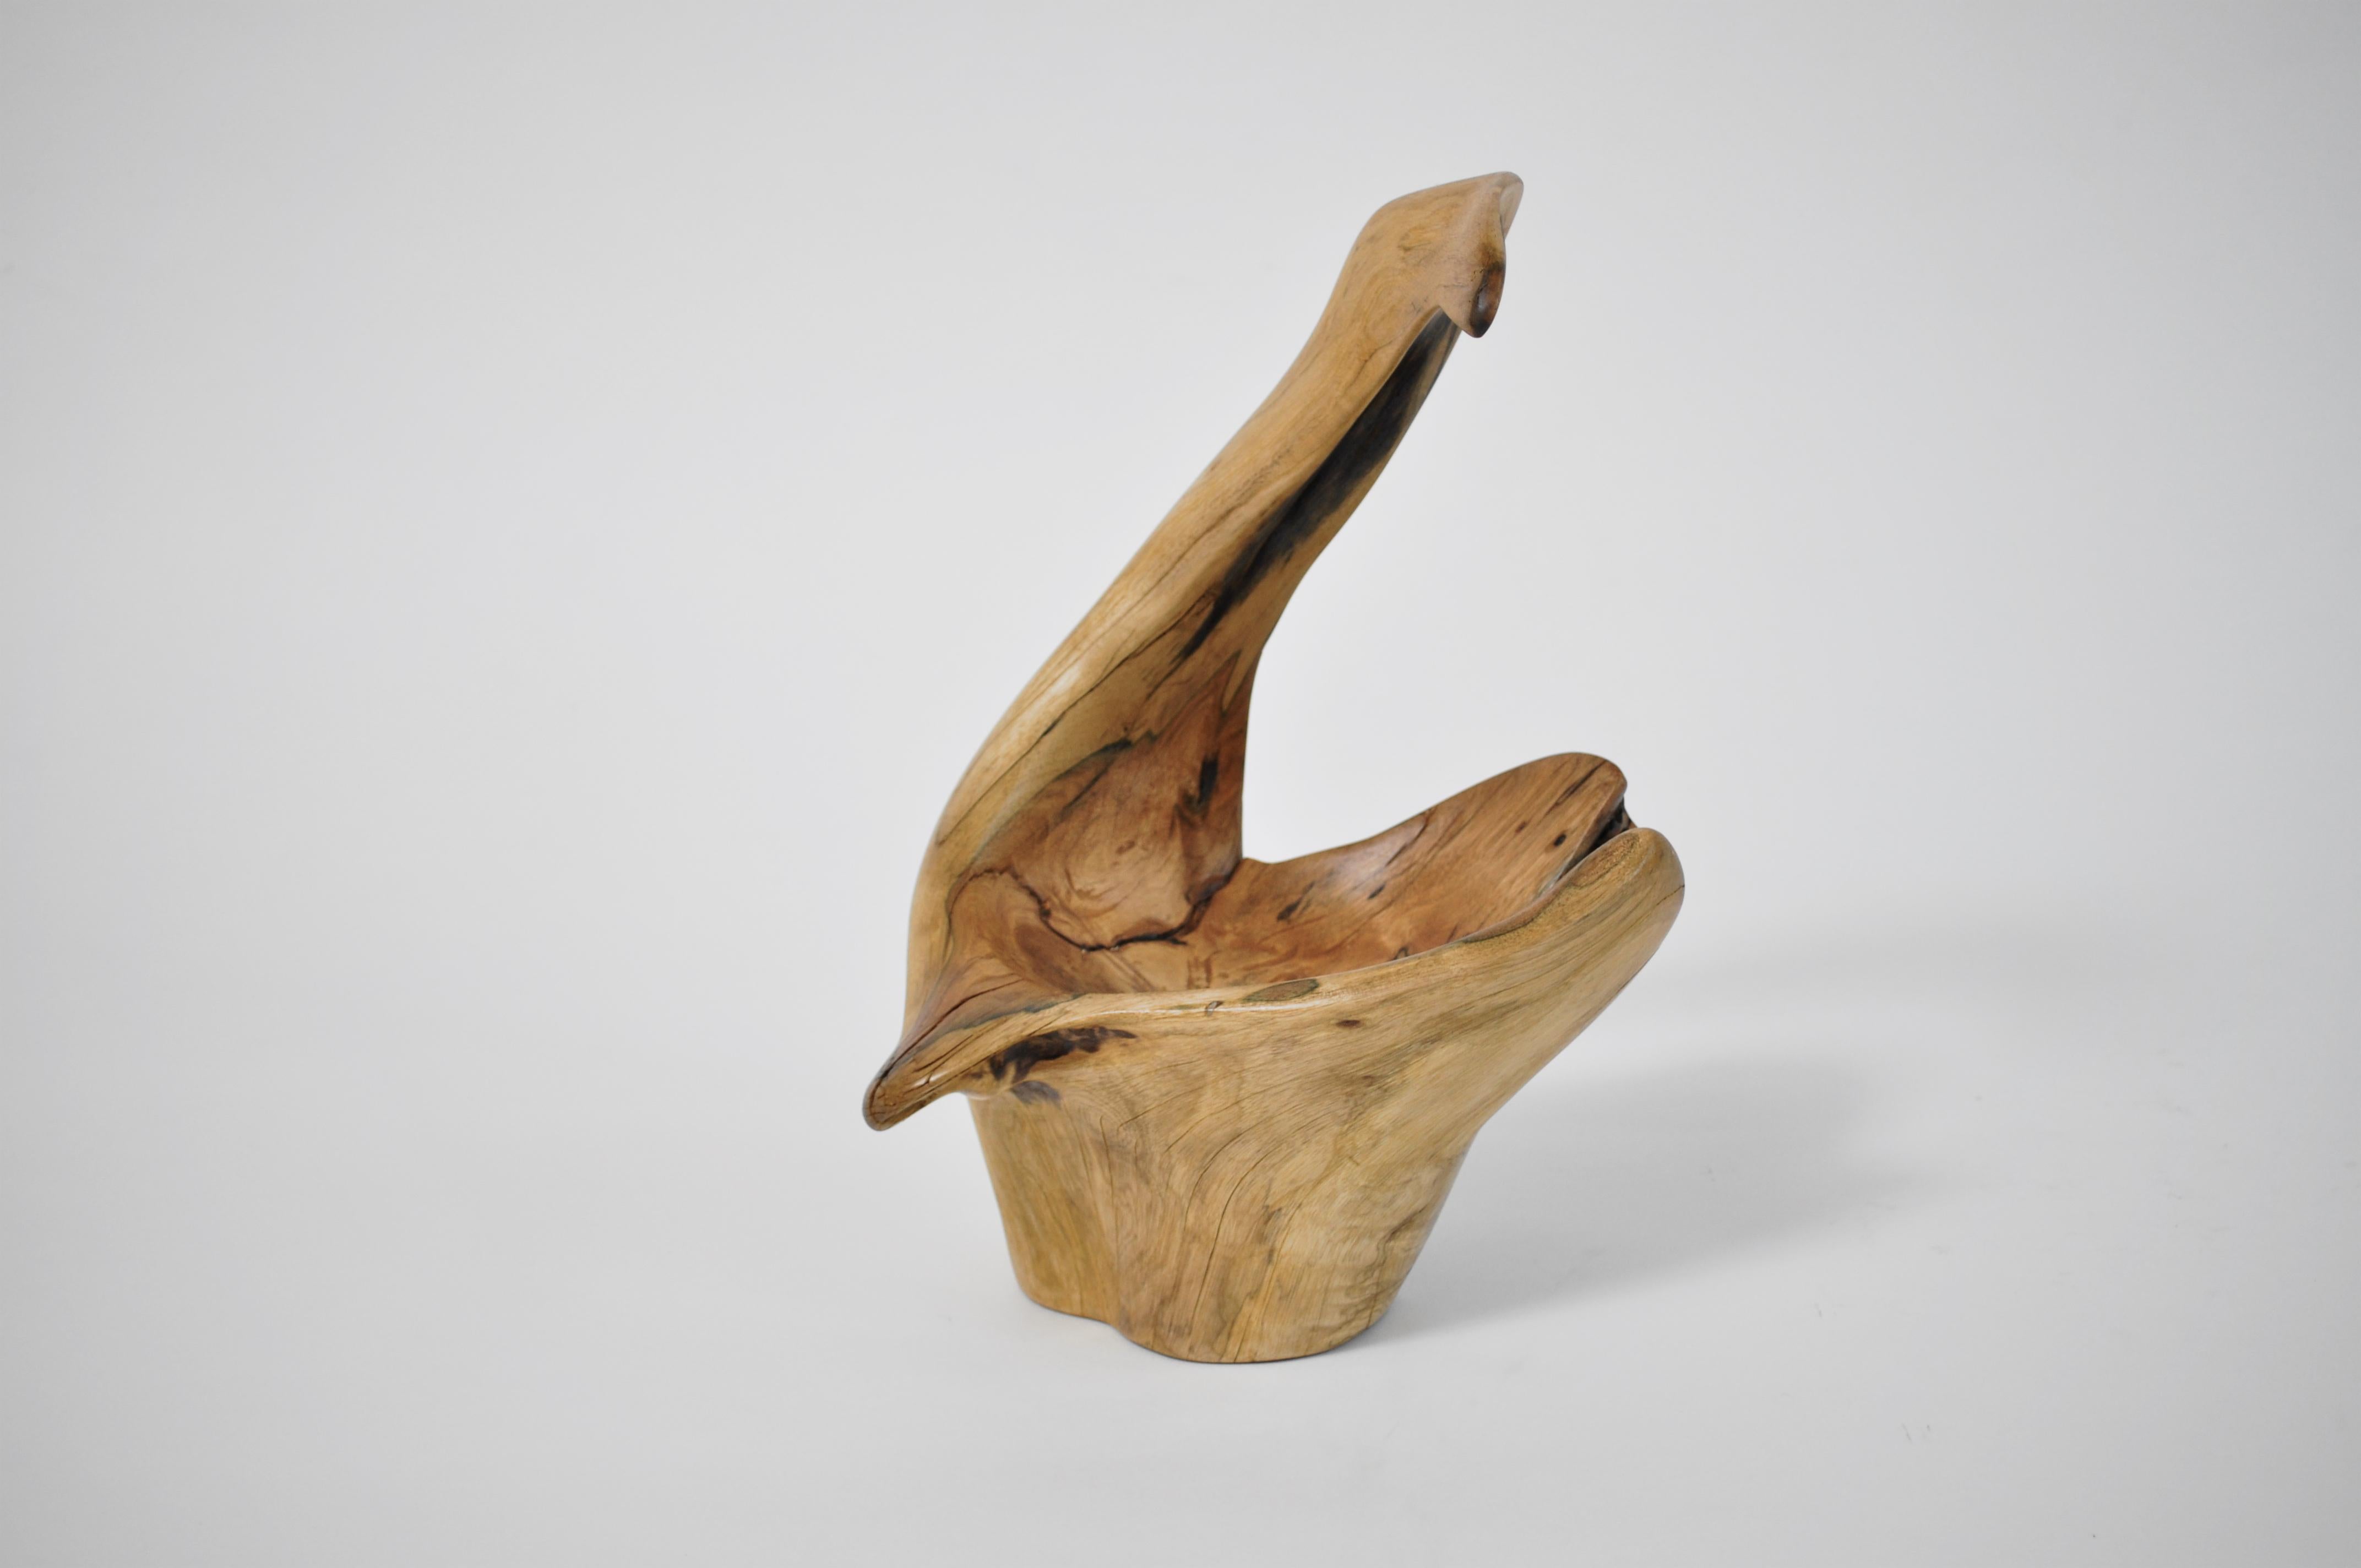 Vessel 1409 by Jörg Pietschmann
Dimensions: D 19 x W 26 x H 32 cm 
Materials: Tropical driftwood.
Finish: polished oil finish.


In Pietschmann’s sculptures, trees that for centuries were part of a landscape and founded in primordial forces tell